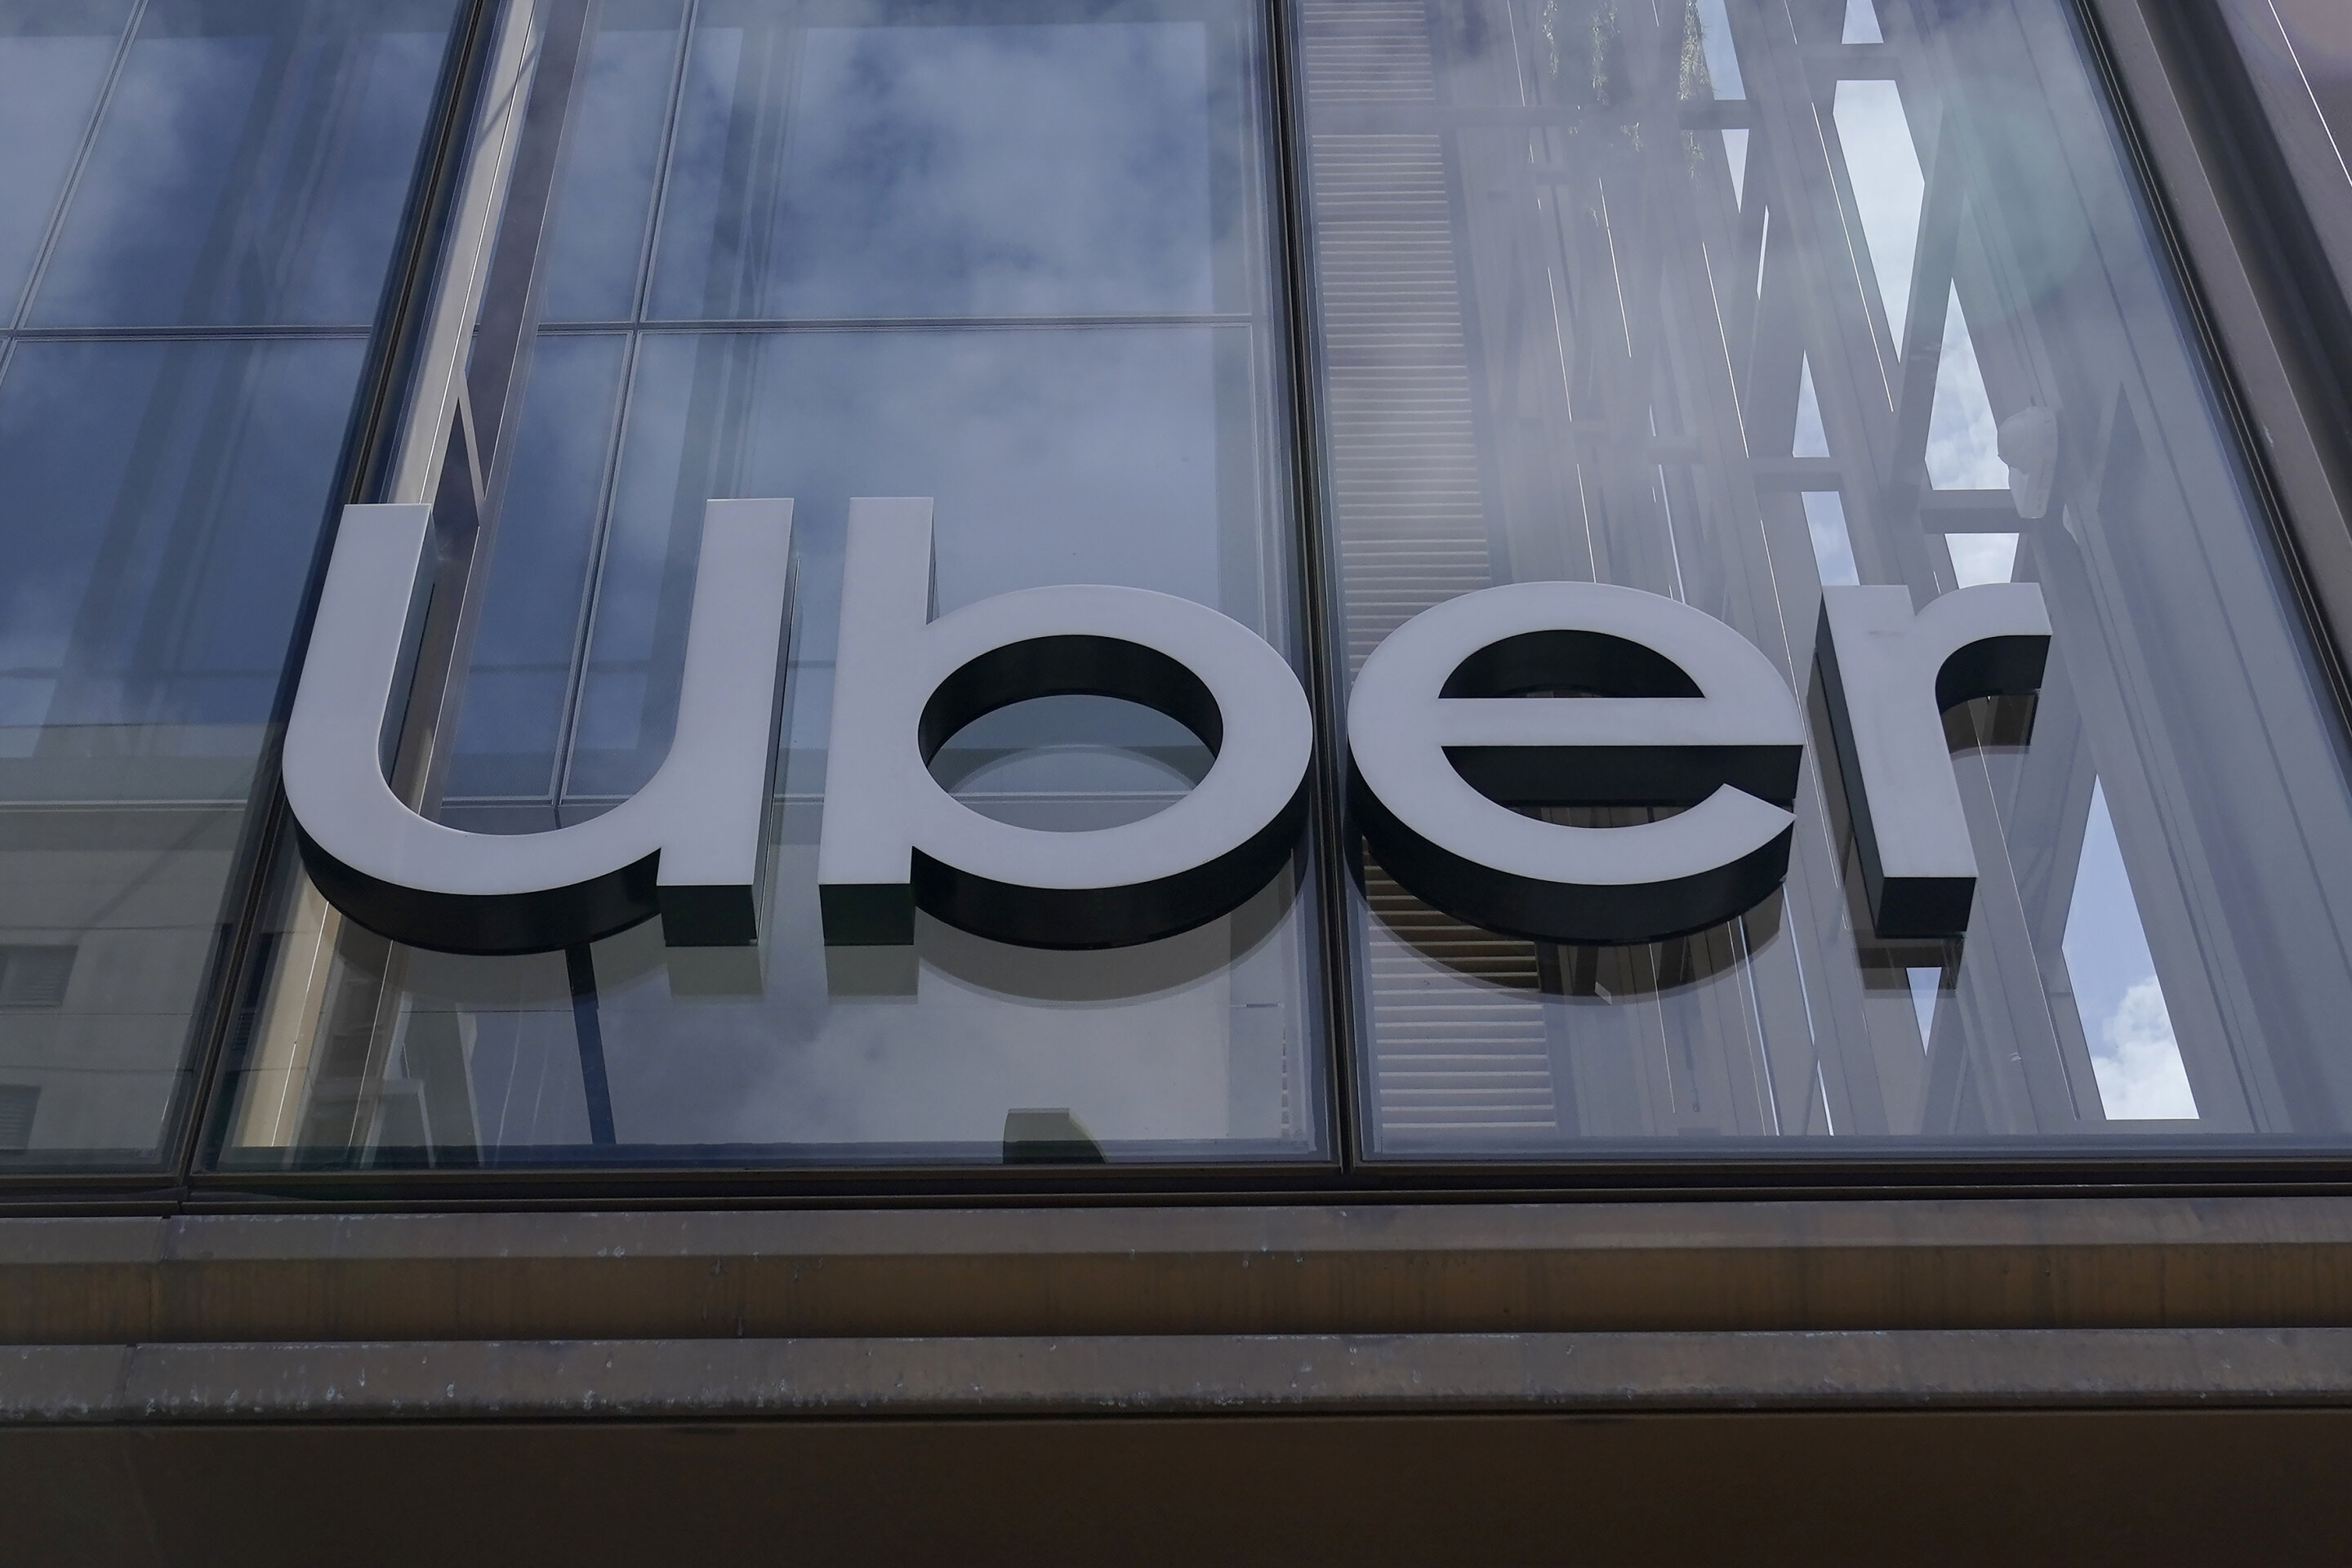 #Hacker claims to breach Uber, security researcher says